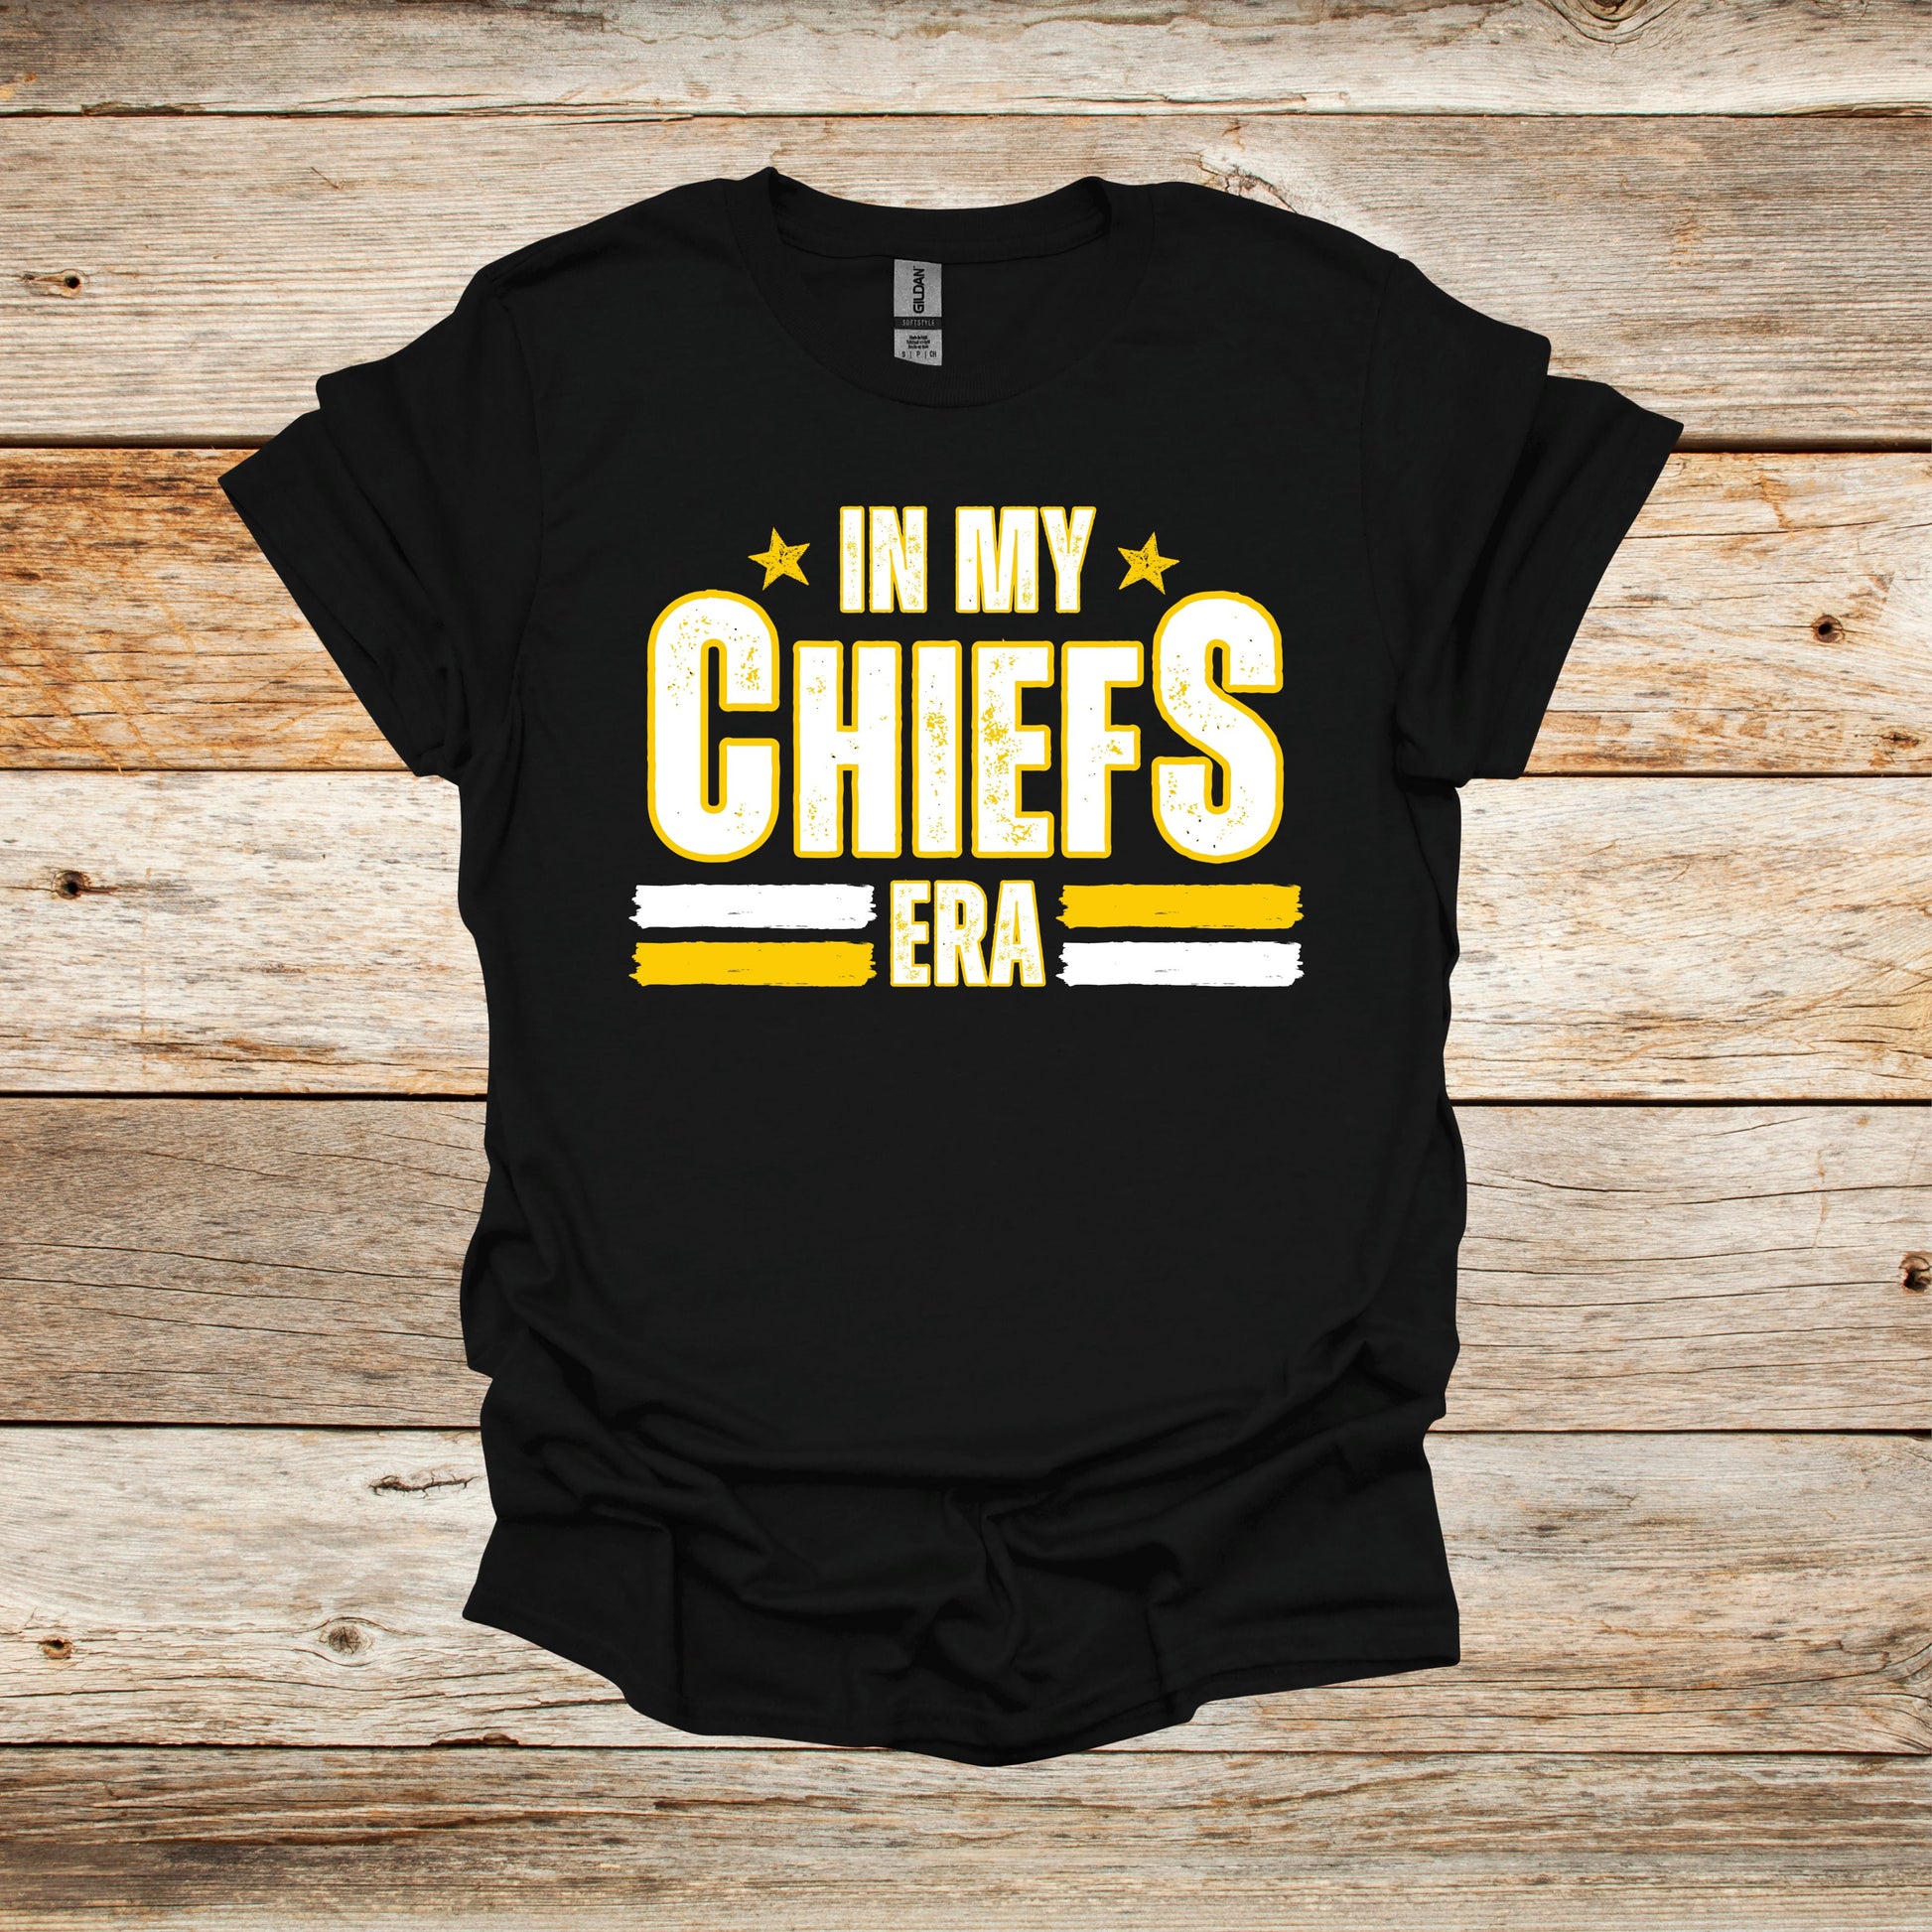 Football T-Shirt - In My Chiefs Era - Kansas City Chiefs - Adult and Children's Tee Shirts - Chiefs - Sports T-Shirts Graphic Avenue Black Adult Small 